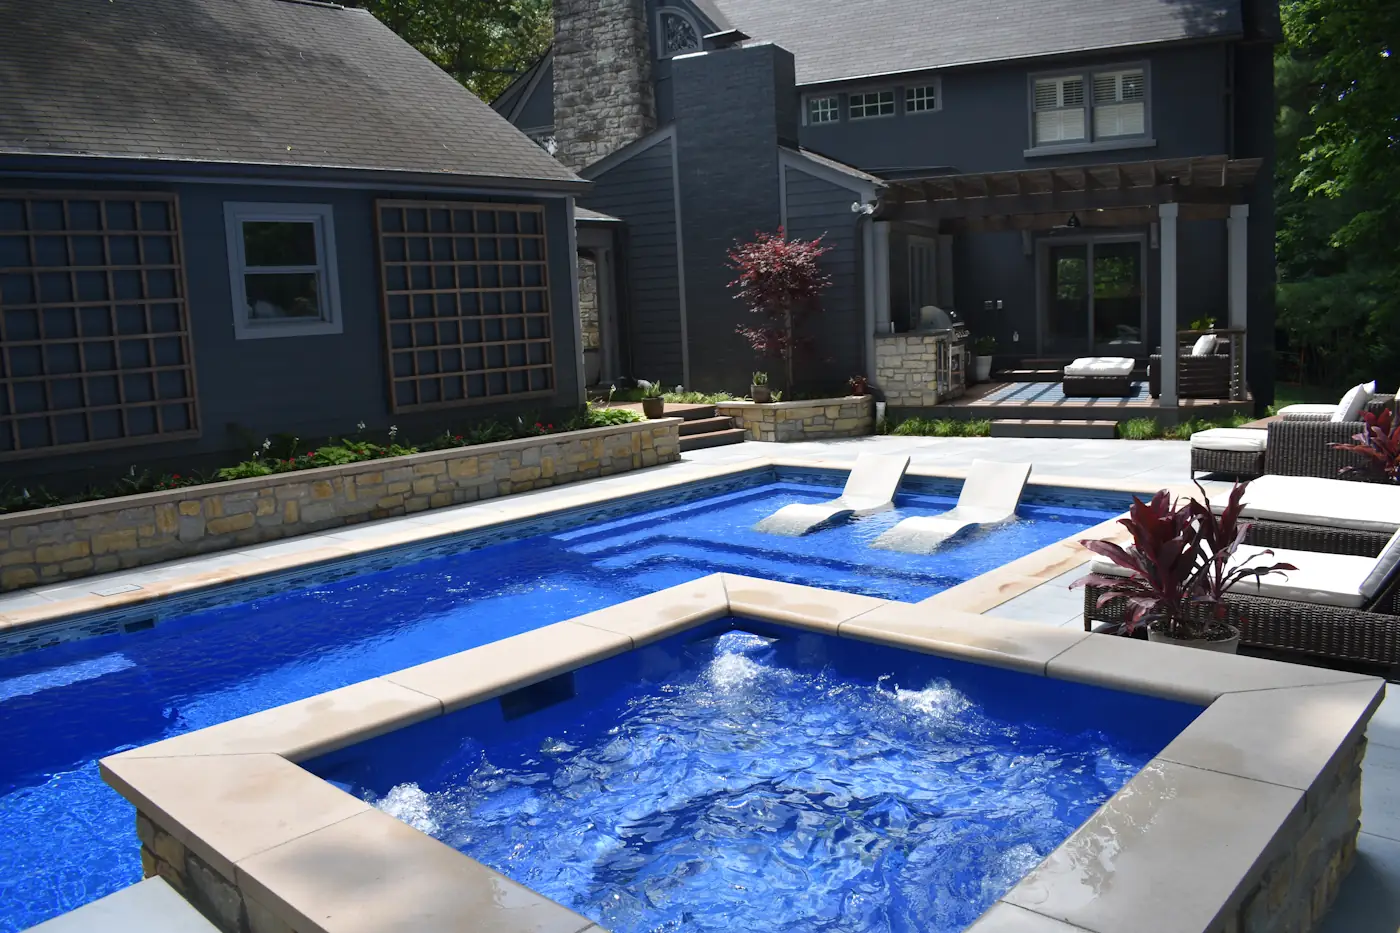 Create the outdoor spaces of your dreams with All Phase Pools & More